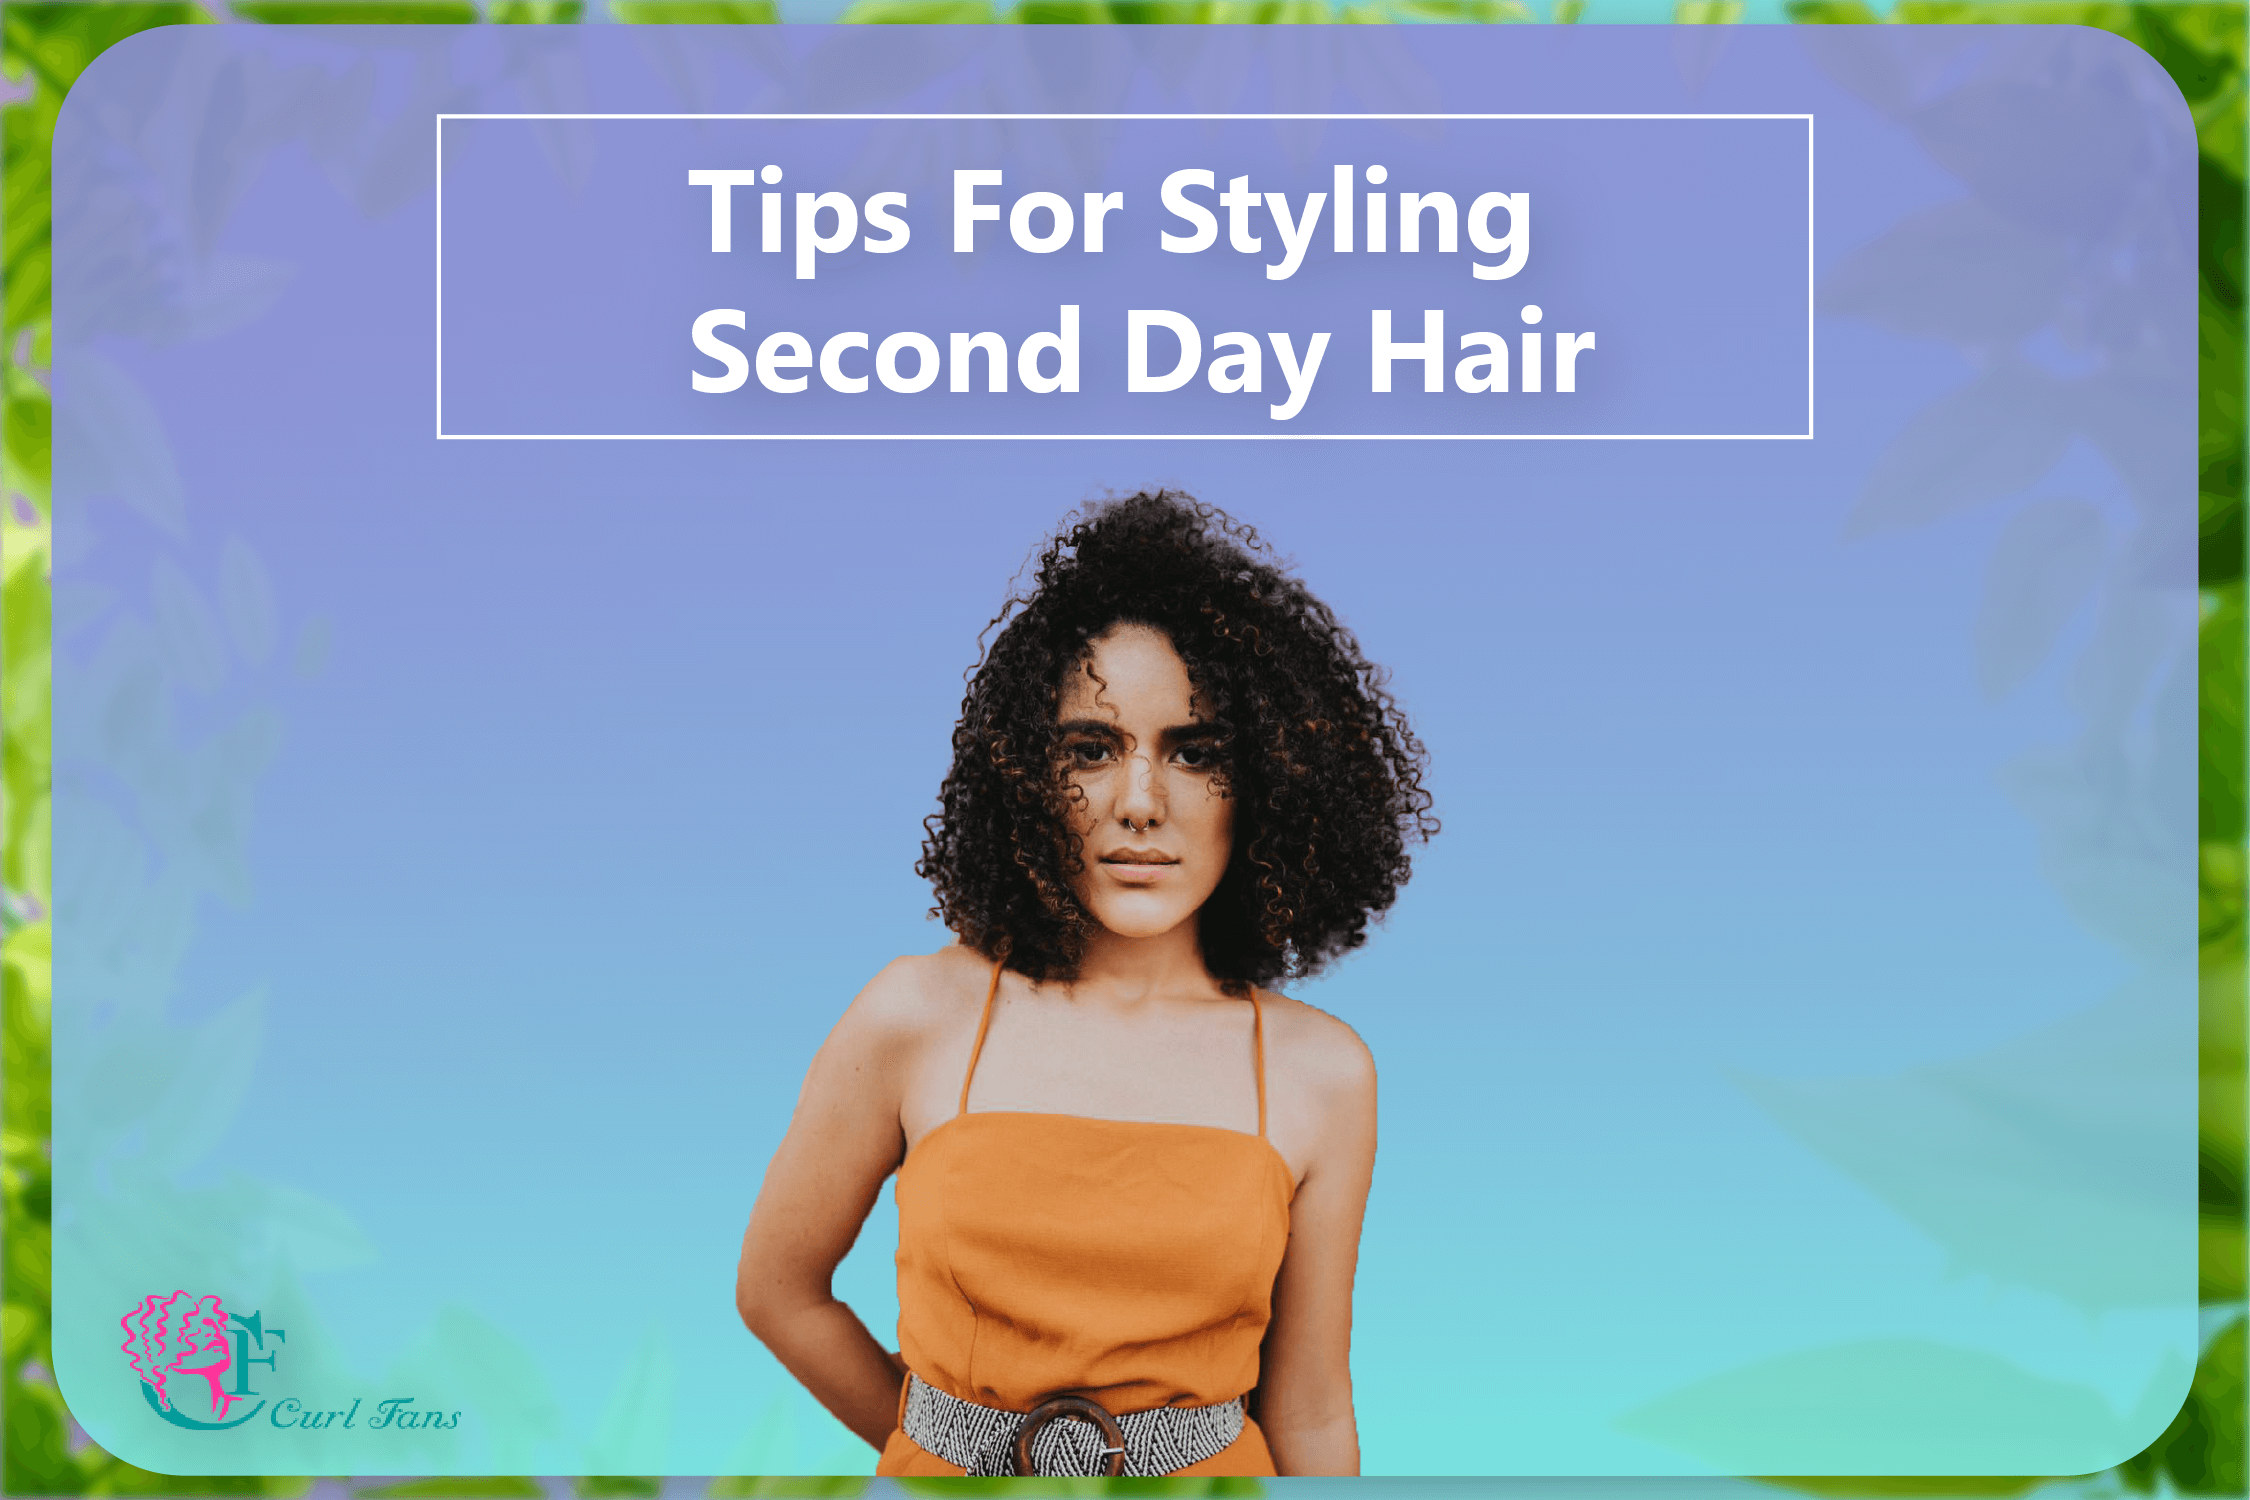 Tips For Styling Second Day Hair - A center for curly hair